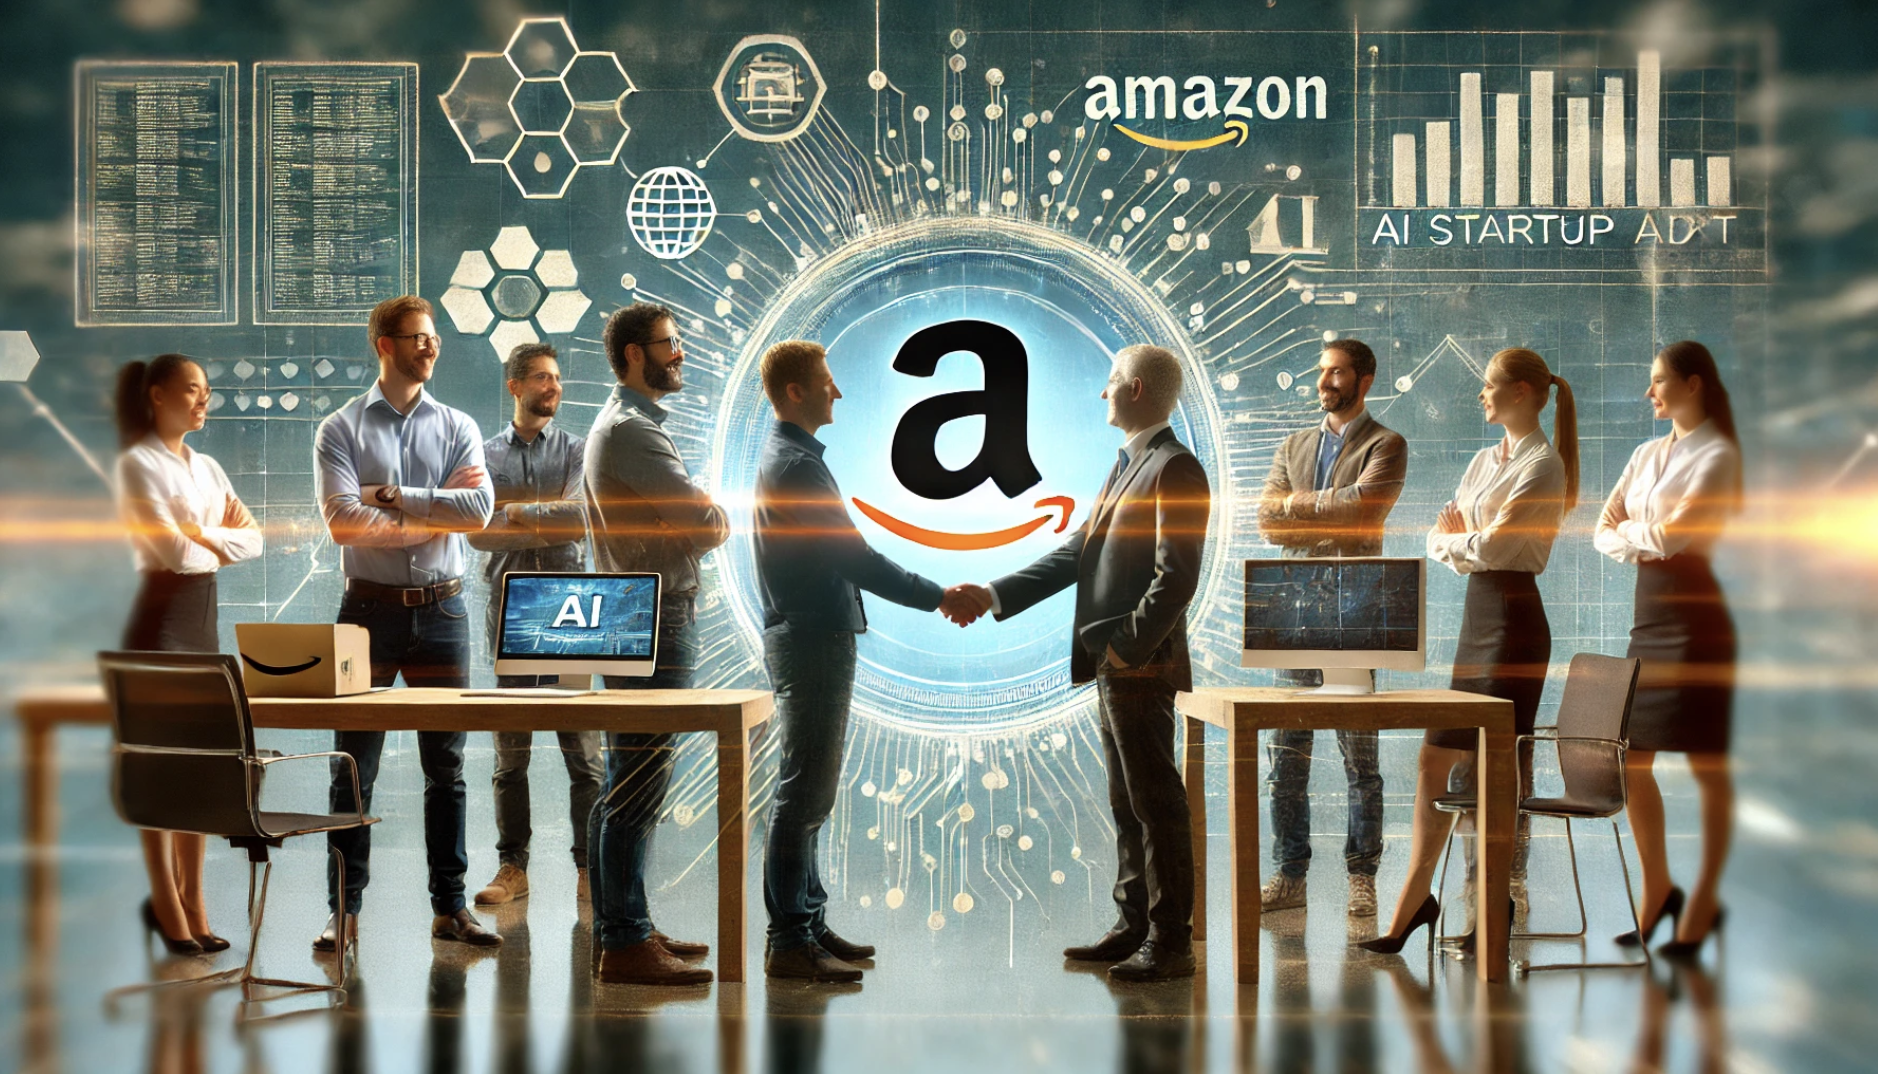 Amazon recruits founders from AI startup Adept